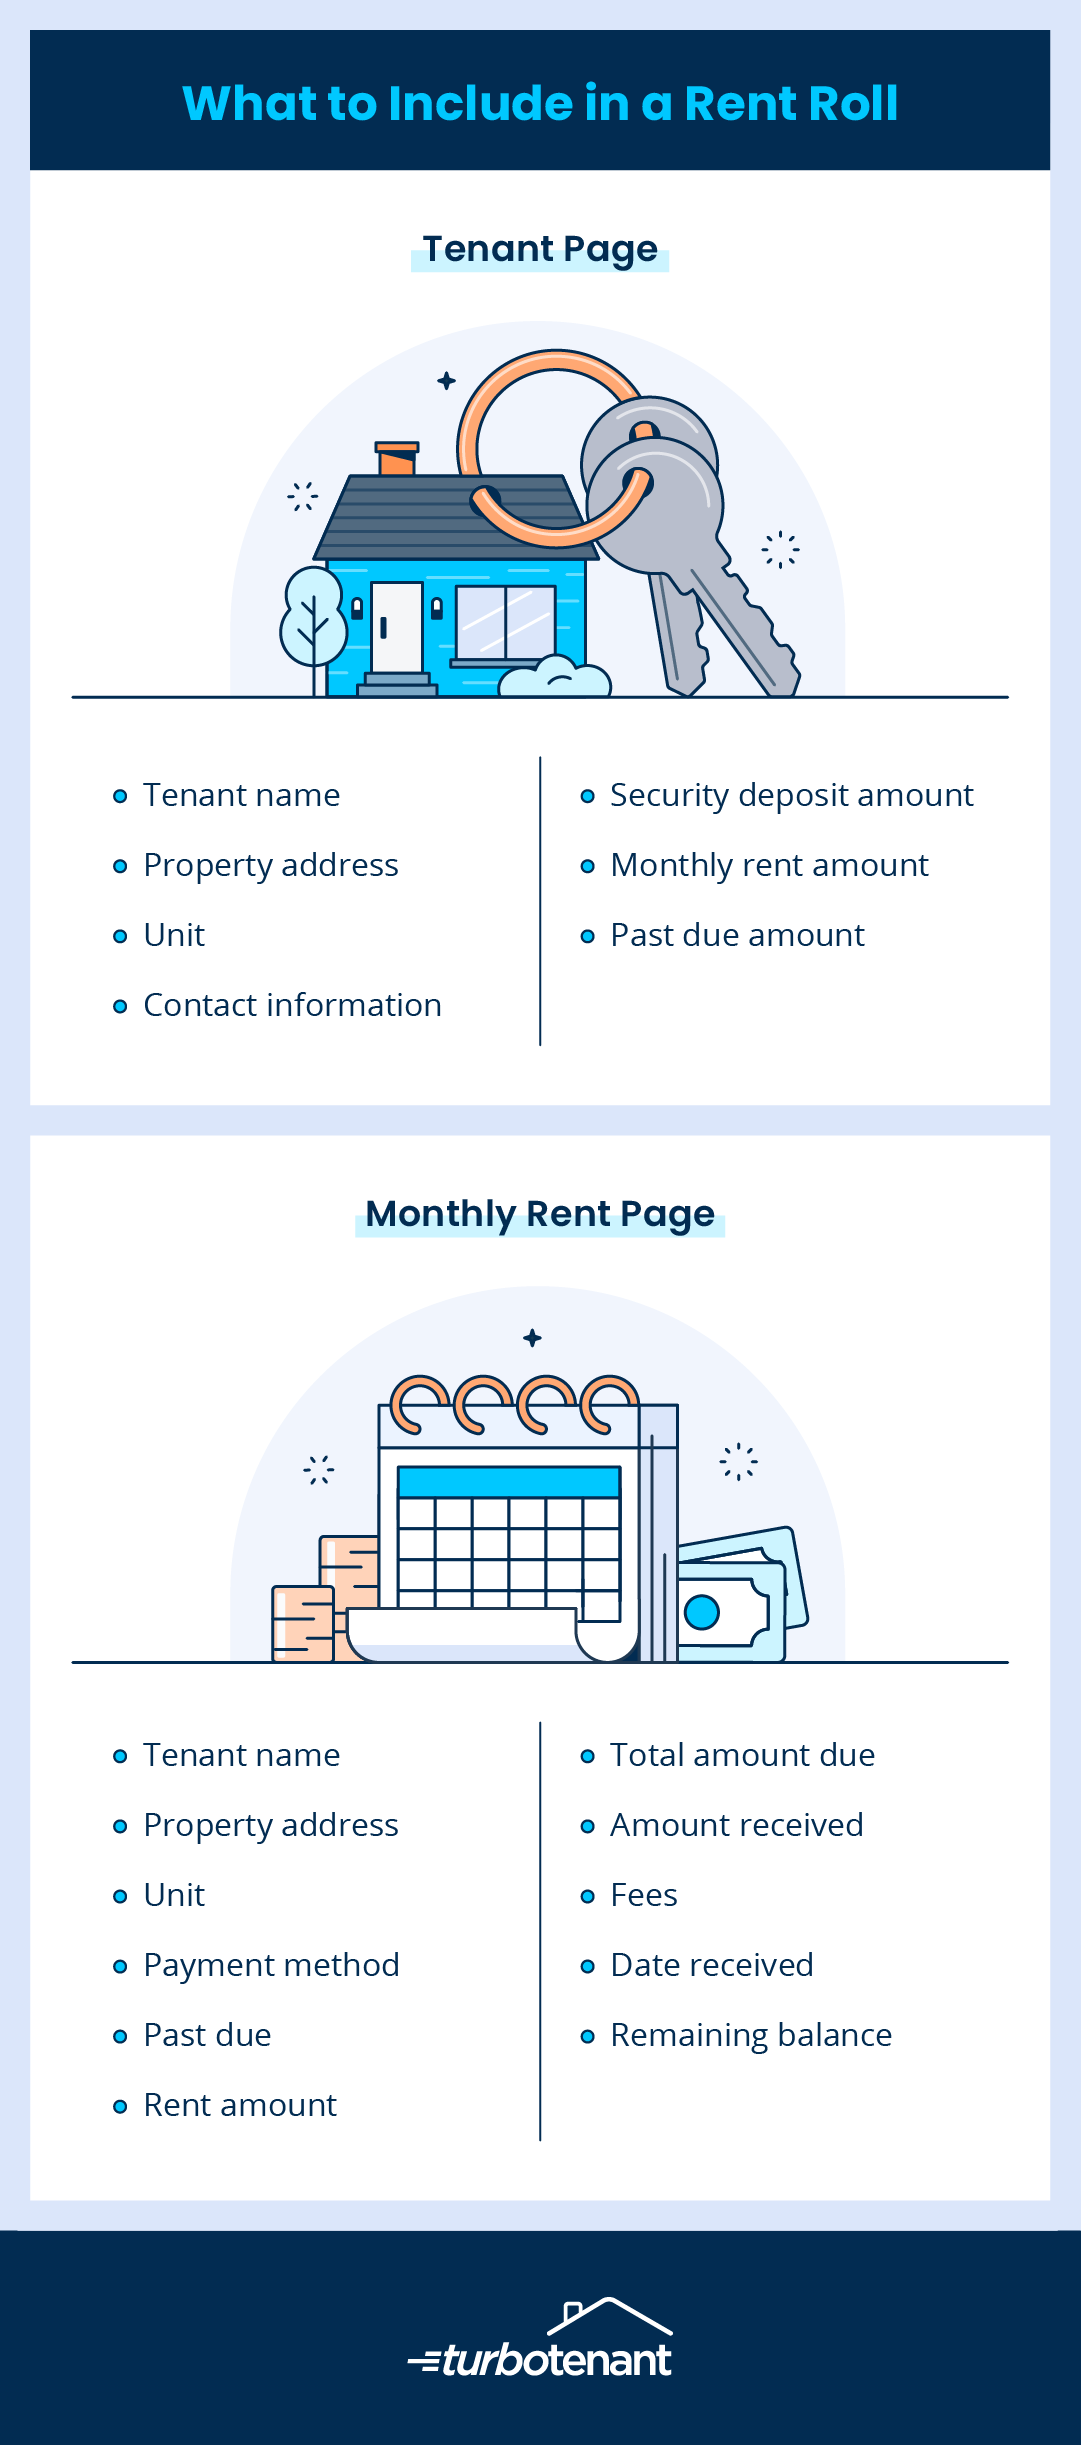 List of what to include in a rent roll